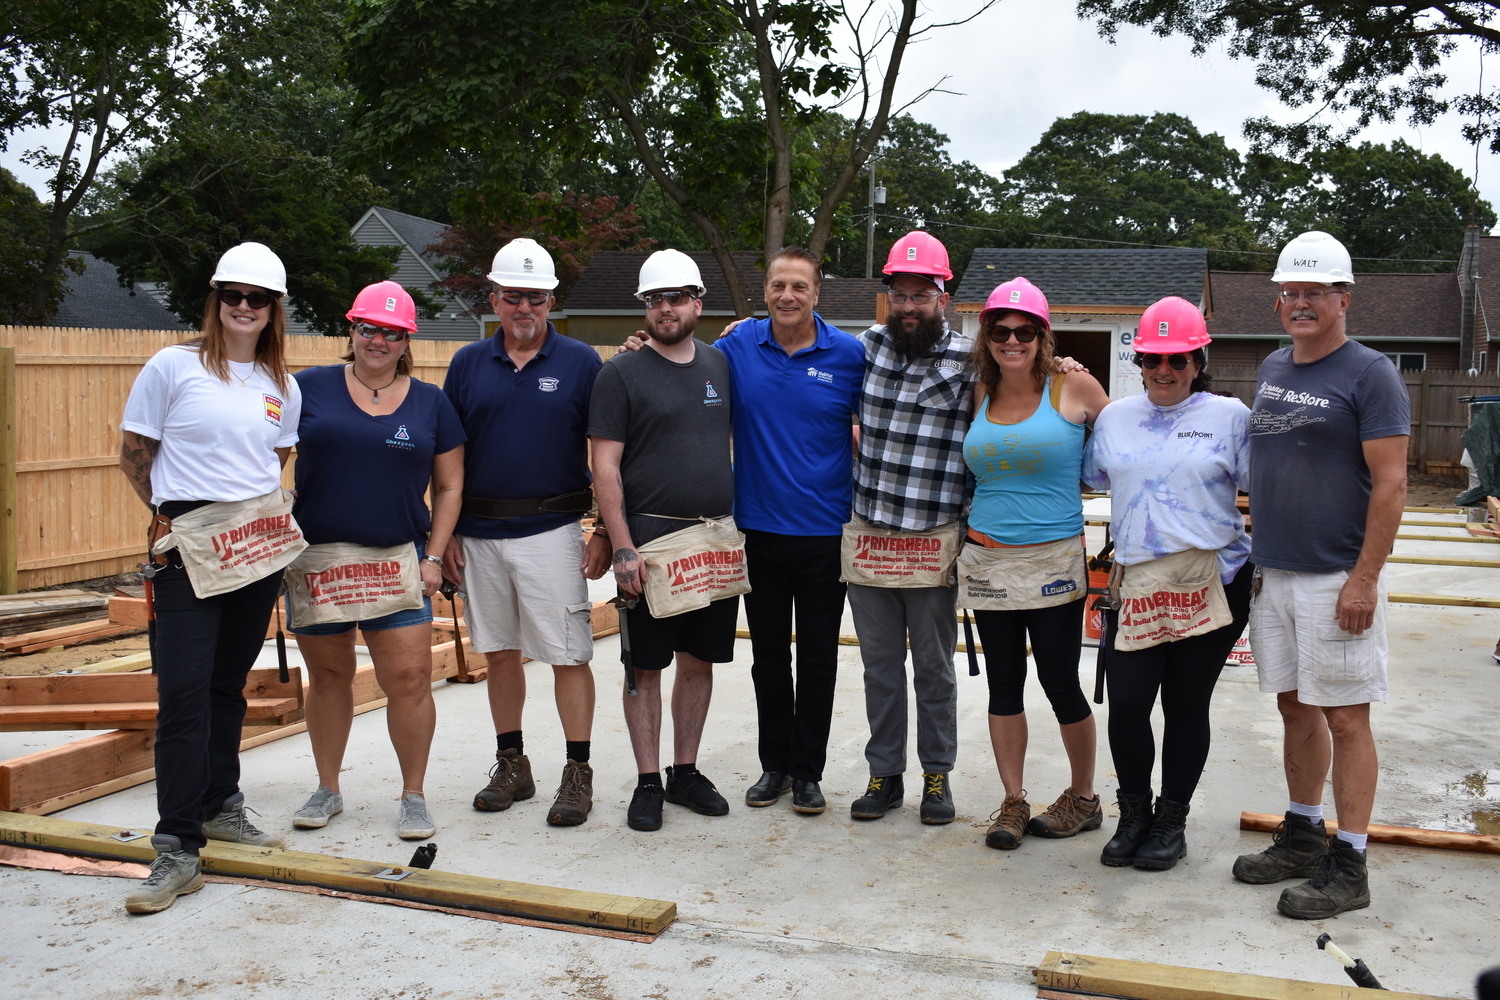 Habitat for Humanity of Long Island CEO Jimmy Jack, center, flanked by House Beer Built wall-raising crew members and, on the far right, construction supervisor Walt Mackey. BRENDAN J. O'REILLY